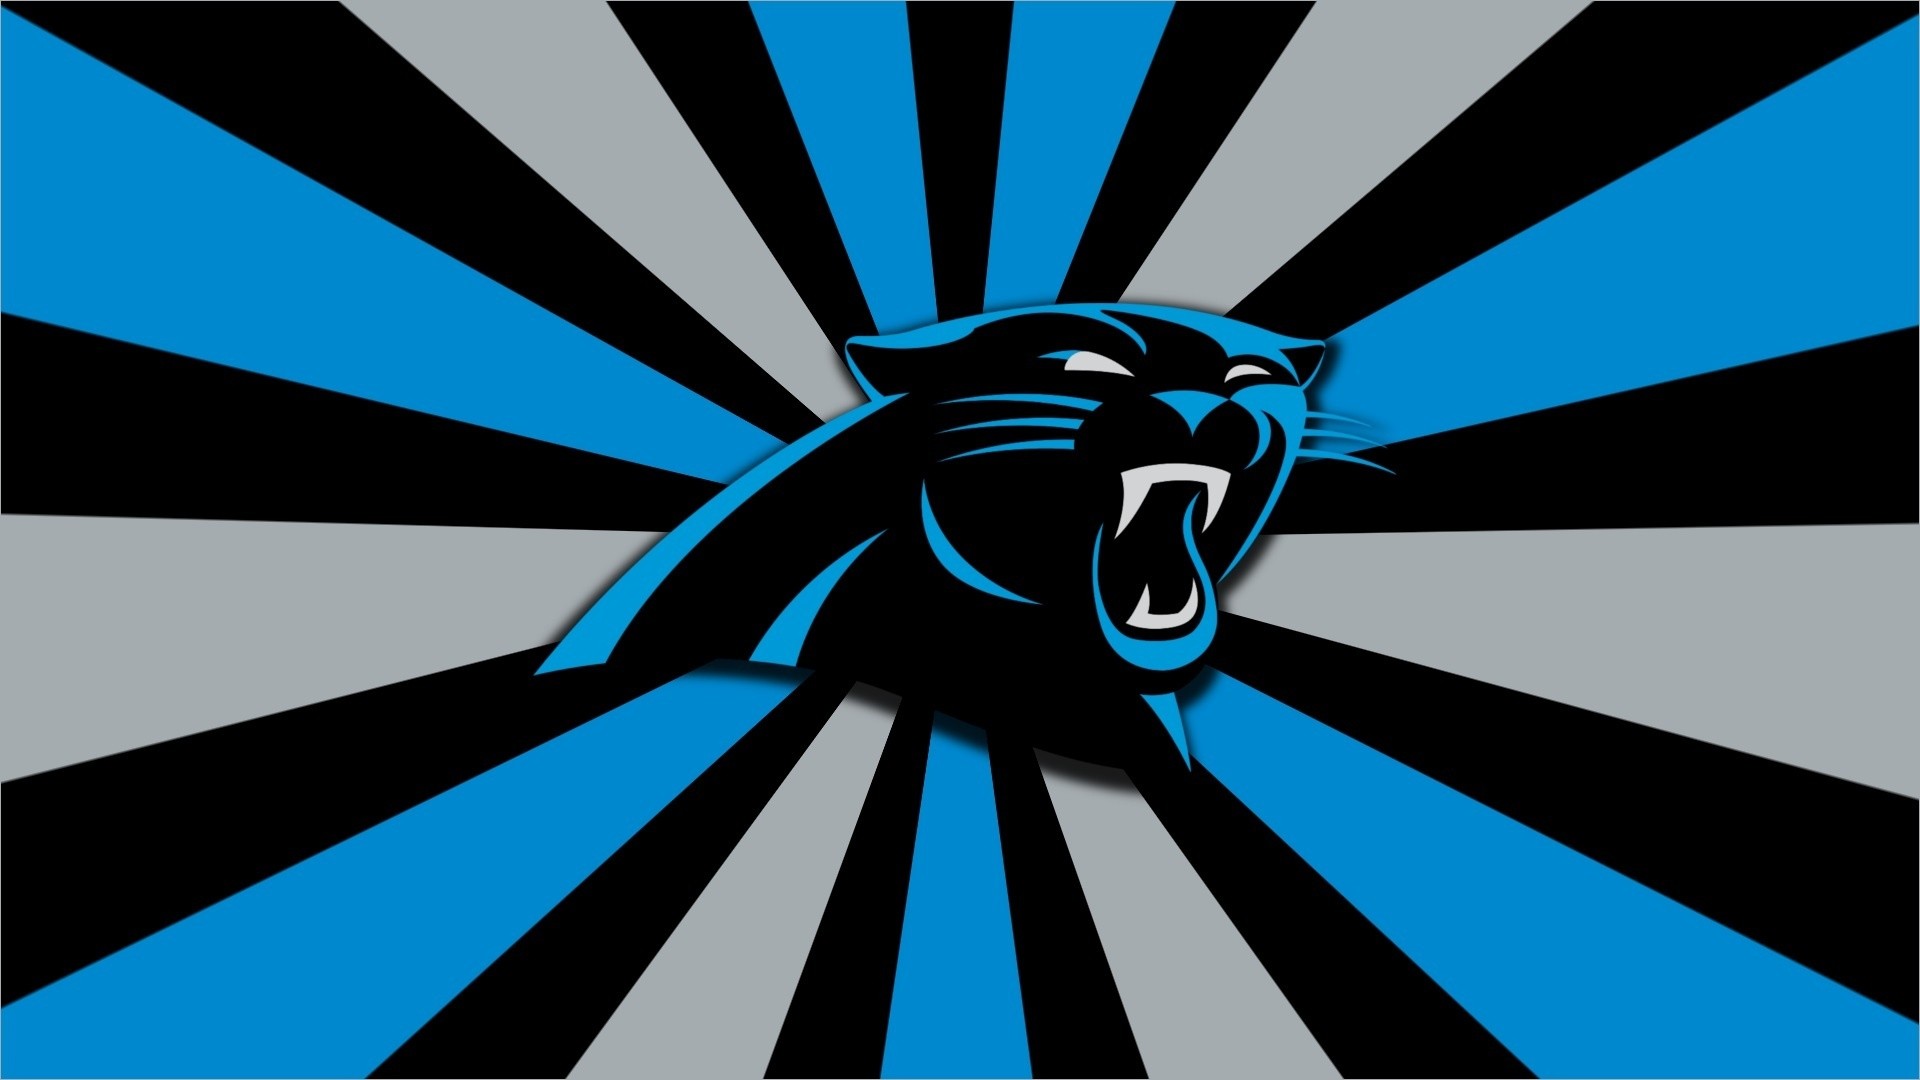 Panthers HD Wallpapers with high-resolution 1920x1080 pixel. You can use this wallpaper for your Mac or Windows Desktop Background, iPhone, Android or Tablet and another Smartphone device